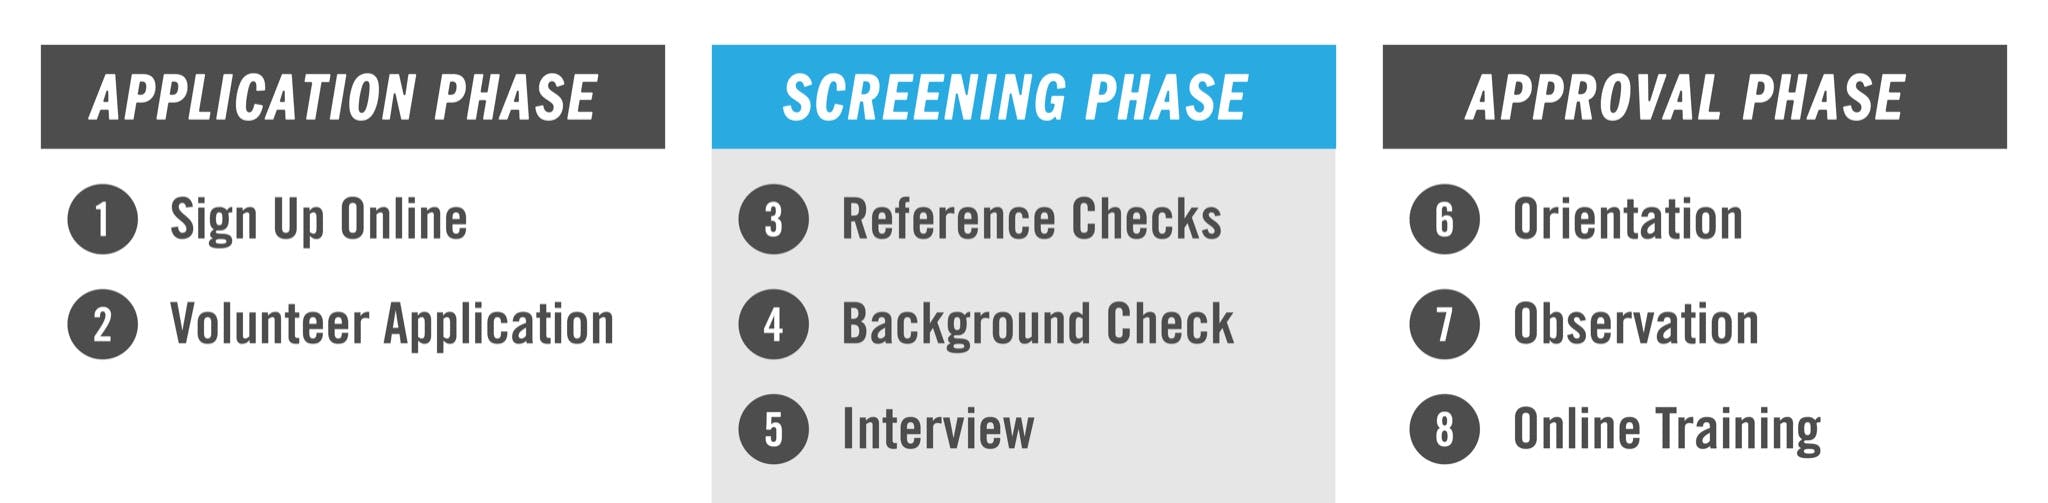 Screening Phase@4x.png